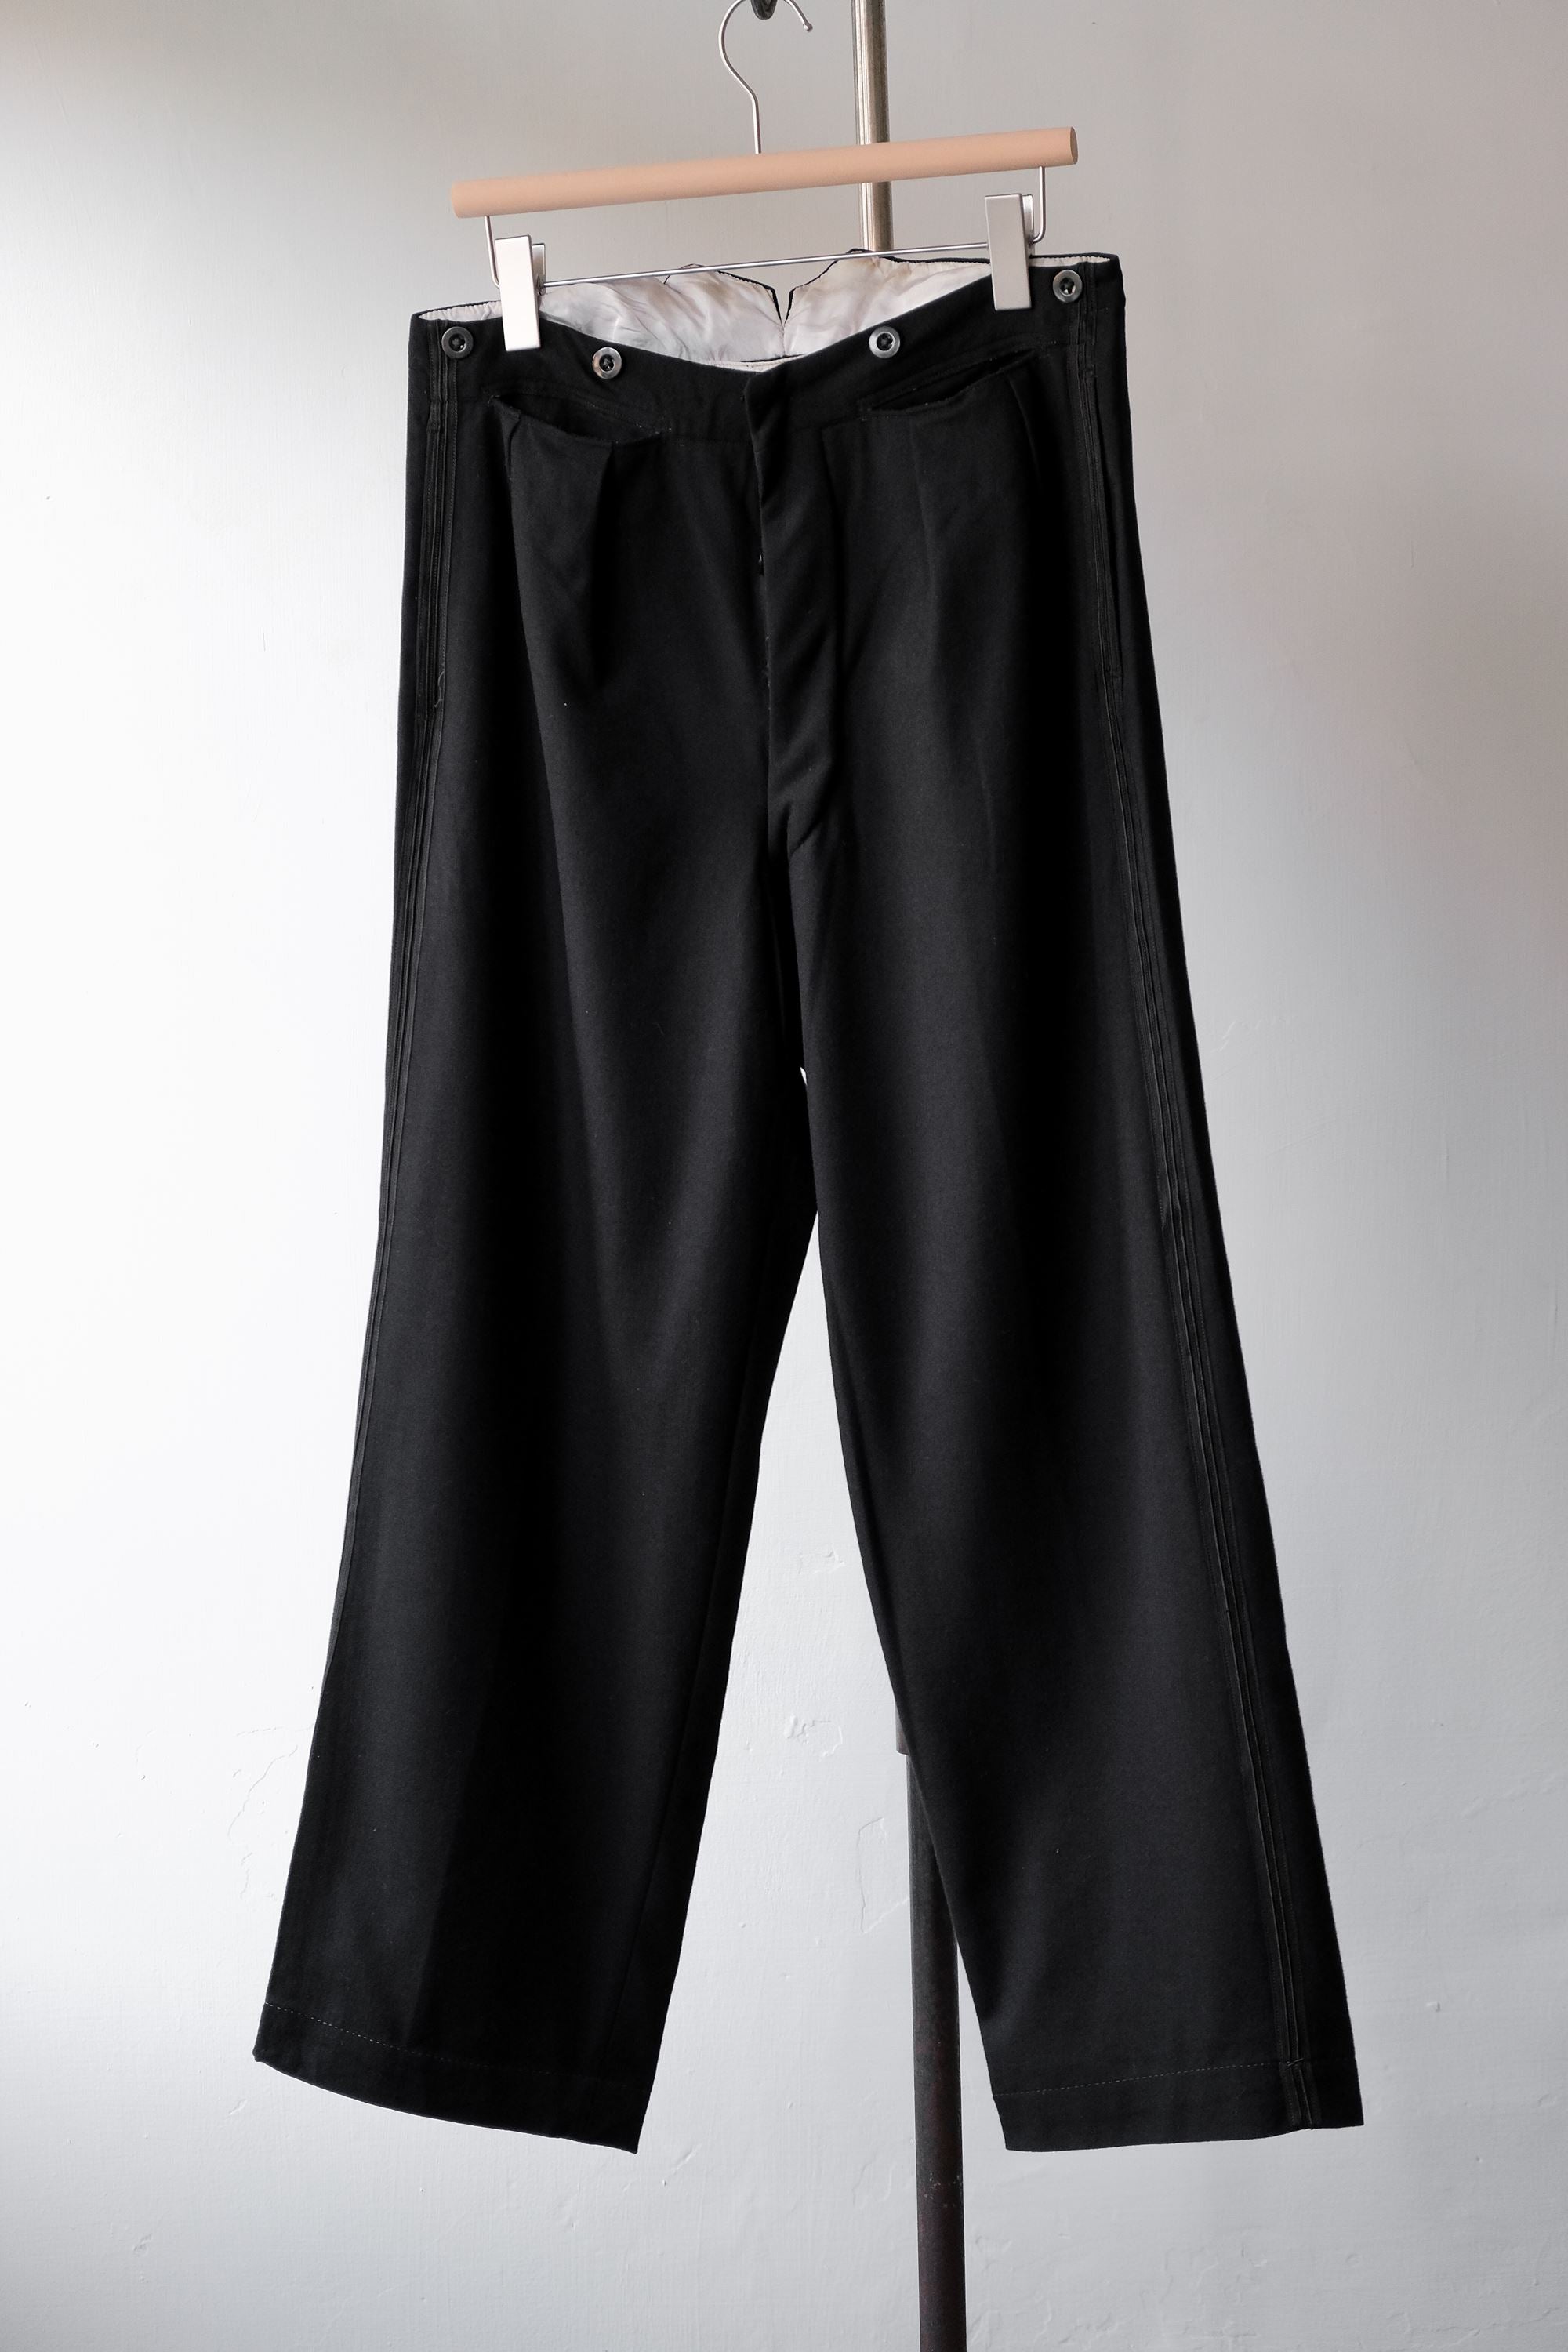 1920's~50's Vintage Wool FishTail Back Trousers